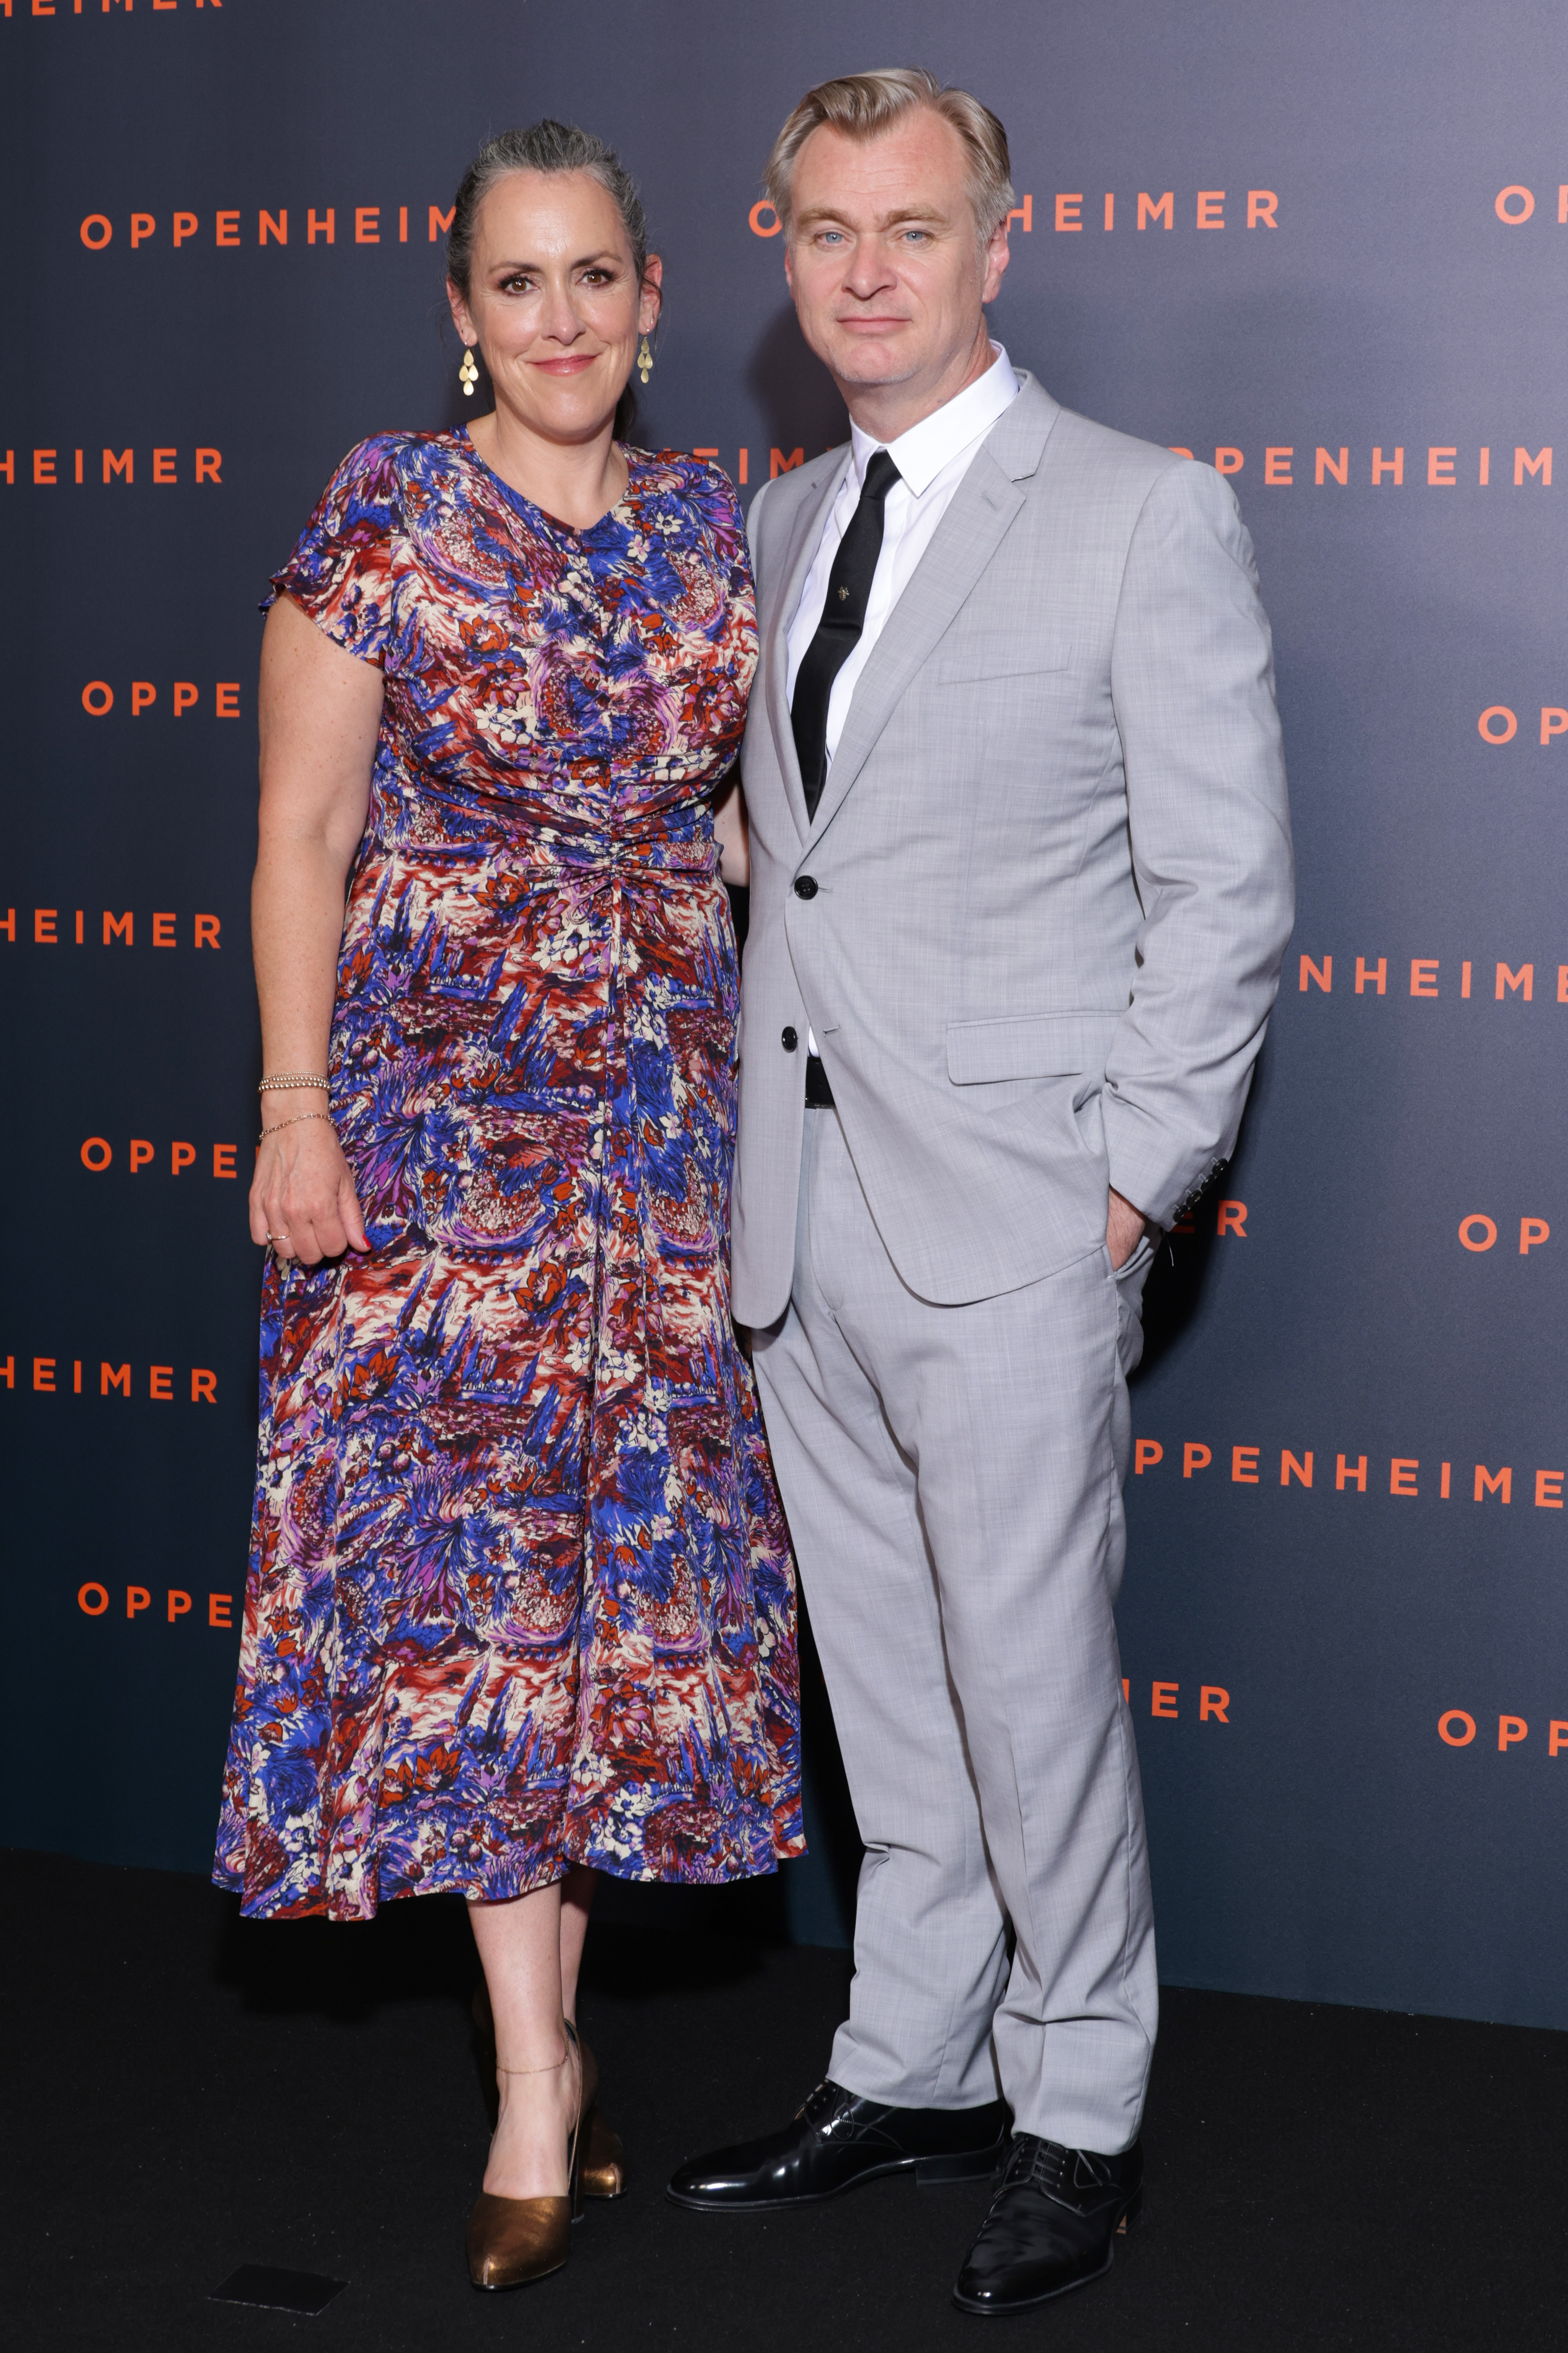 the couple at the movie premiere